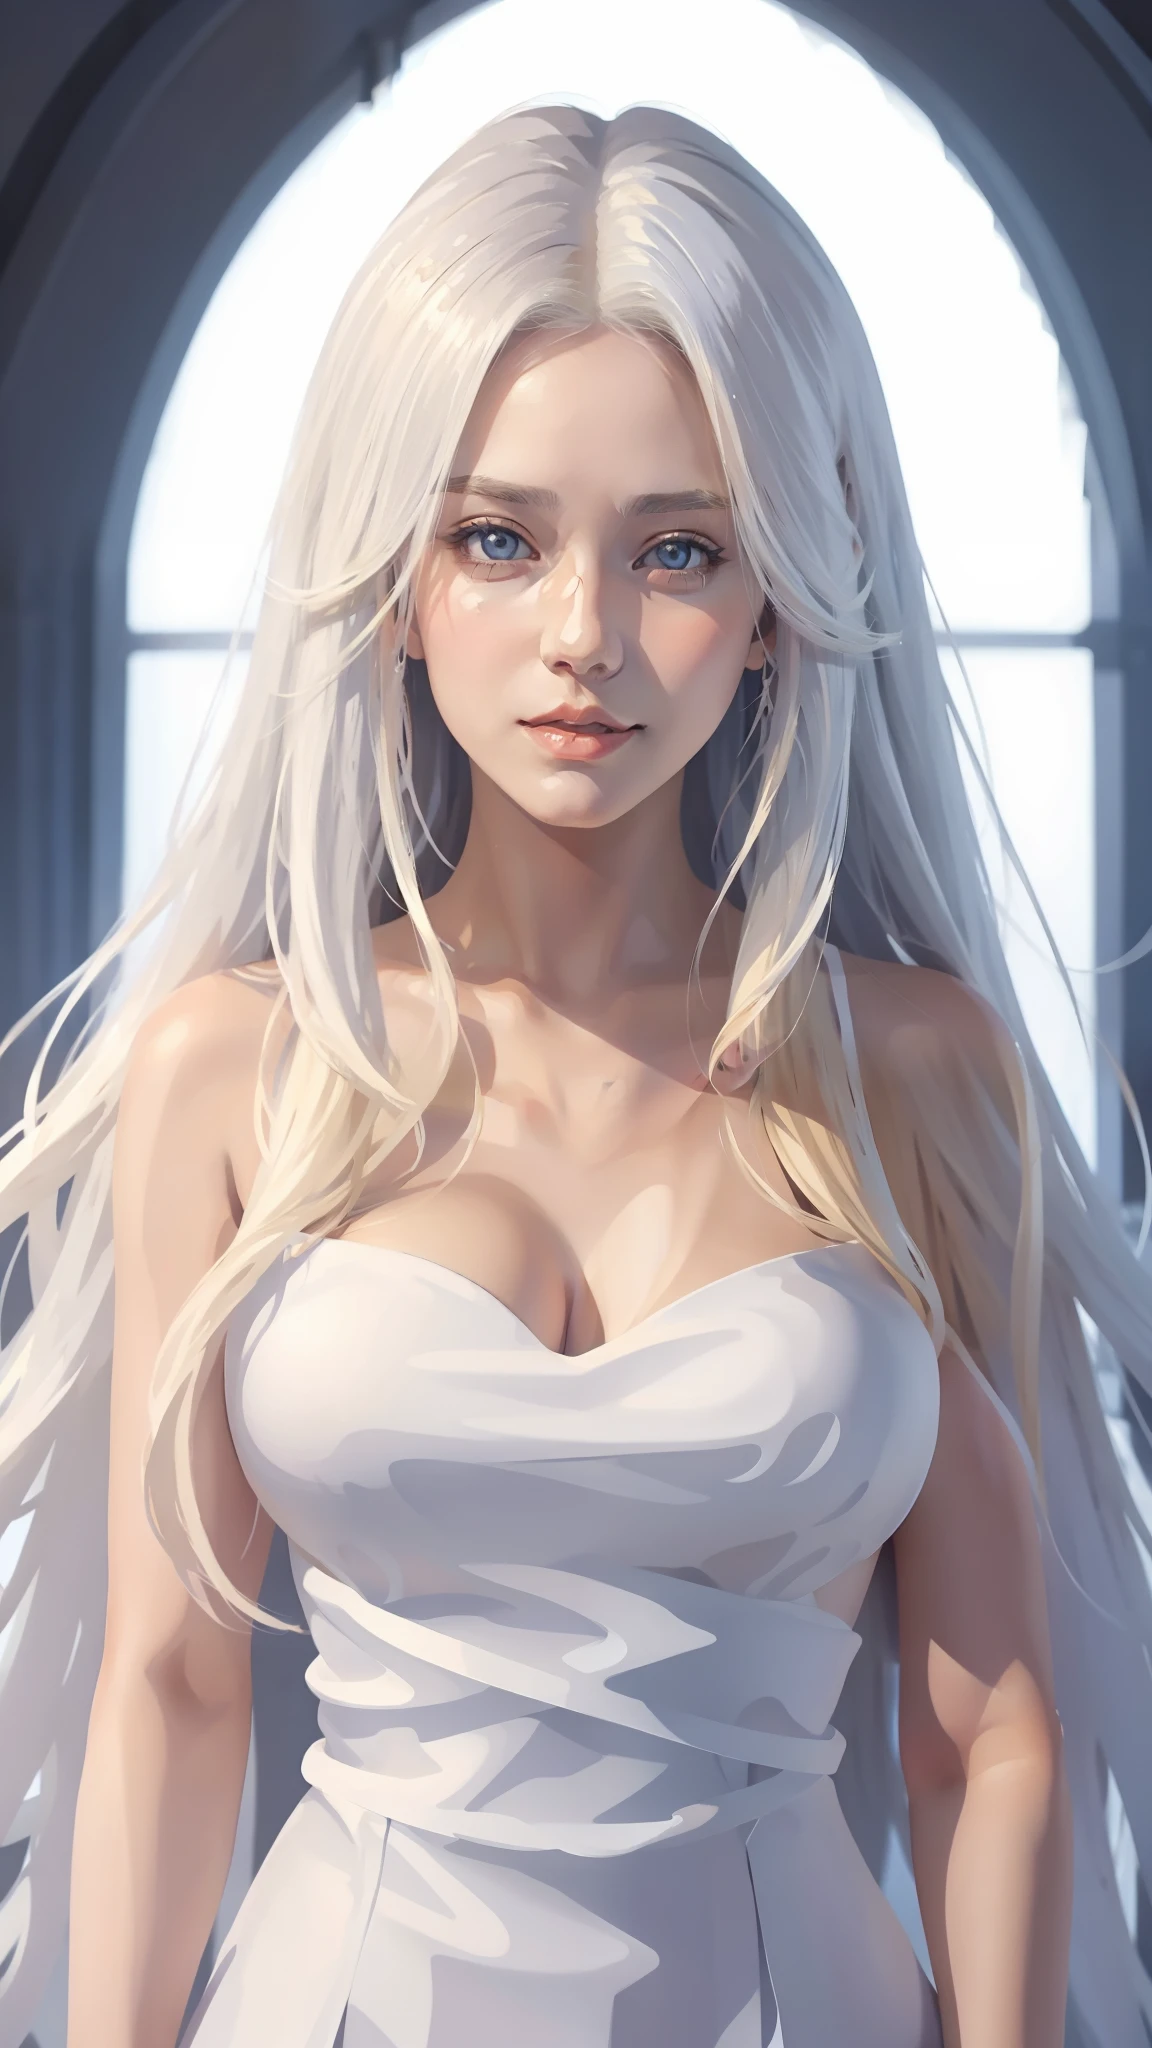 Blonde haired girl，Long white hair posing for photos, an anime drawing by Yang J, Pisif, Digital art, Girl with white hair, Photorealistic anime, Perfect white haired girl, Guviz, a beautiful anime portrait, Stunning anime face portrait, Guviz-style artwork, hyper realistic anime, long  white hair, with long white hair，Super big breasts，exposed。